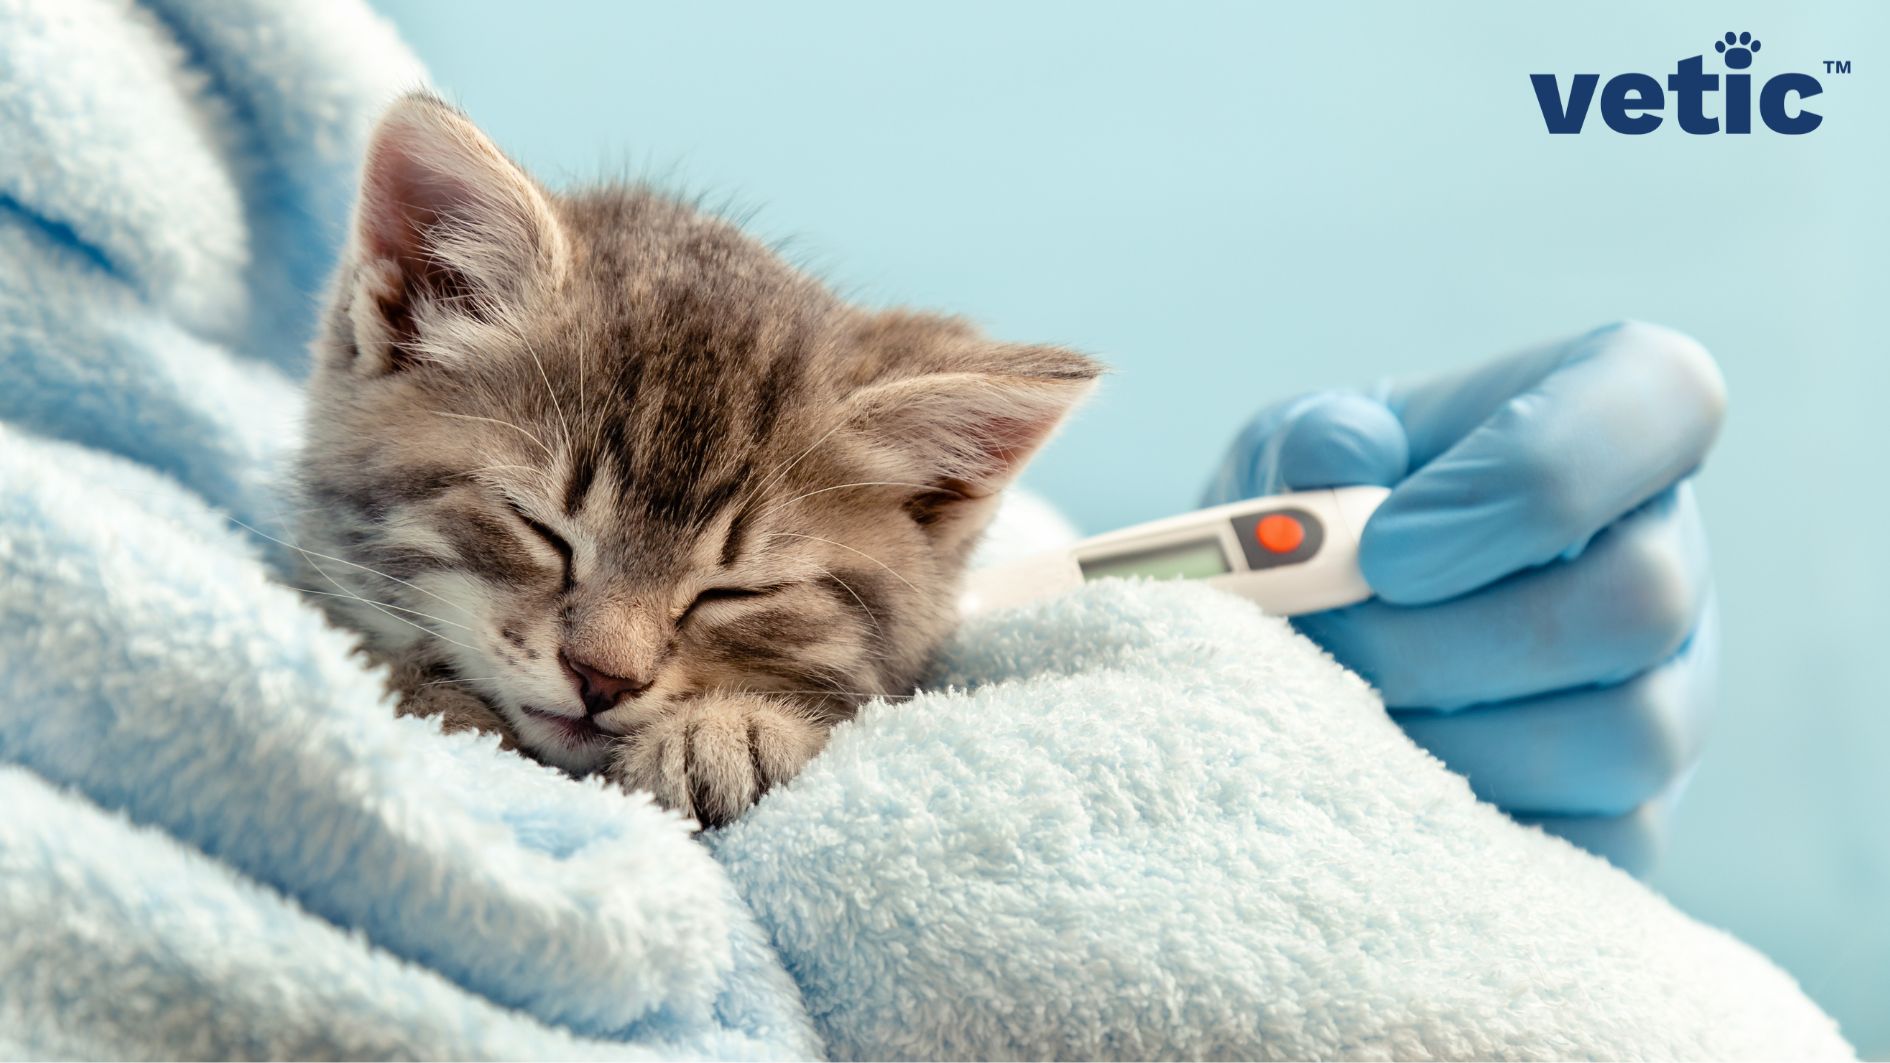 Tiny mackerel kitten wrapped in a baby blue towel. Only the kitten's head and part of one paw is visible. One hand wearing a blue glove taking the temperature of the kitten using a digital thermometer. Any sickness in such young animals is an emergency in pets.